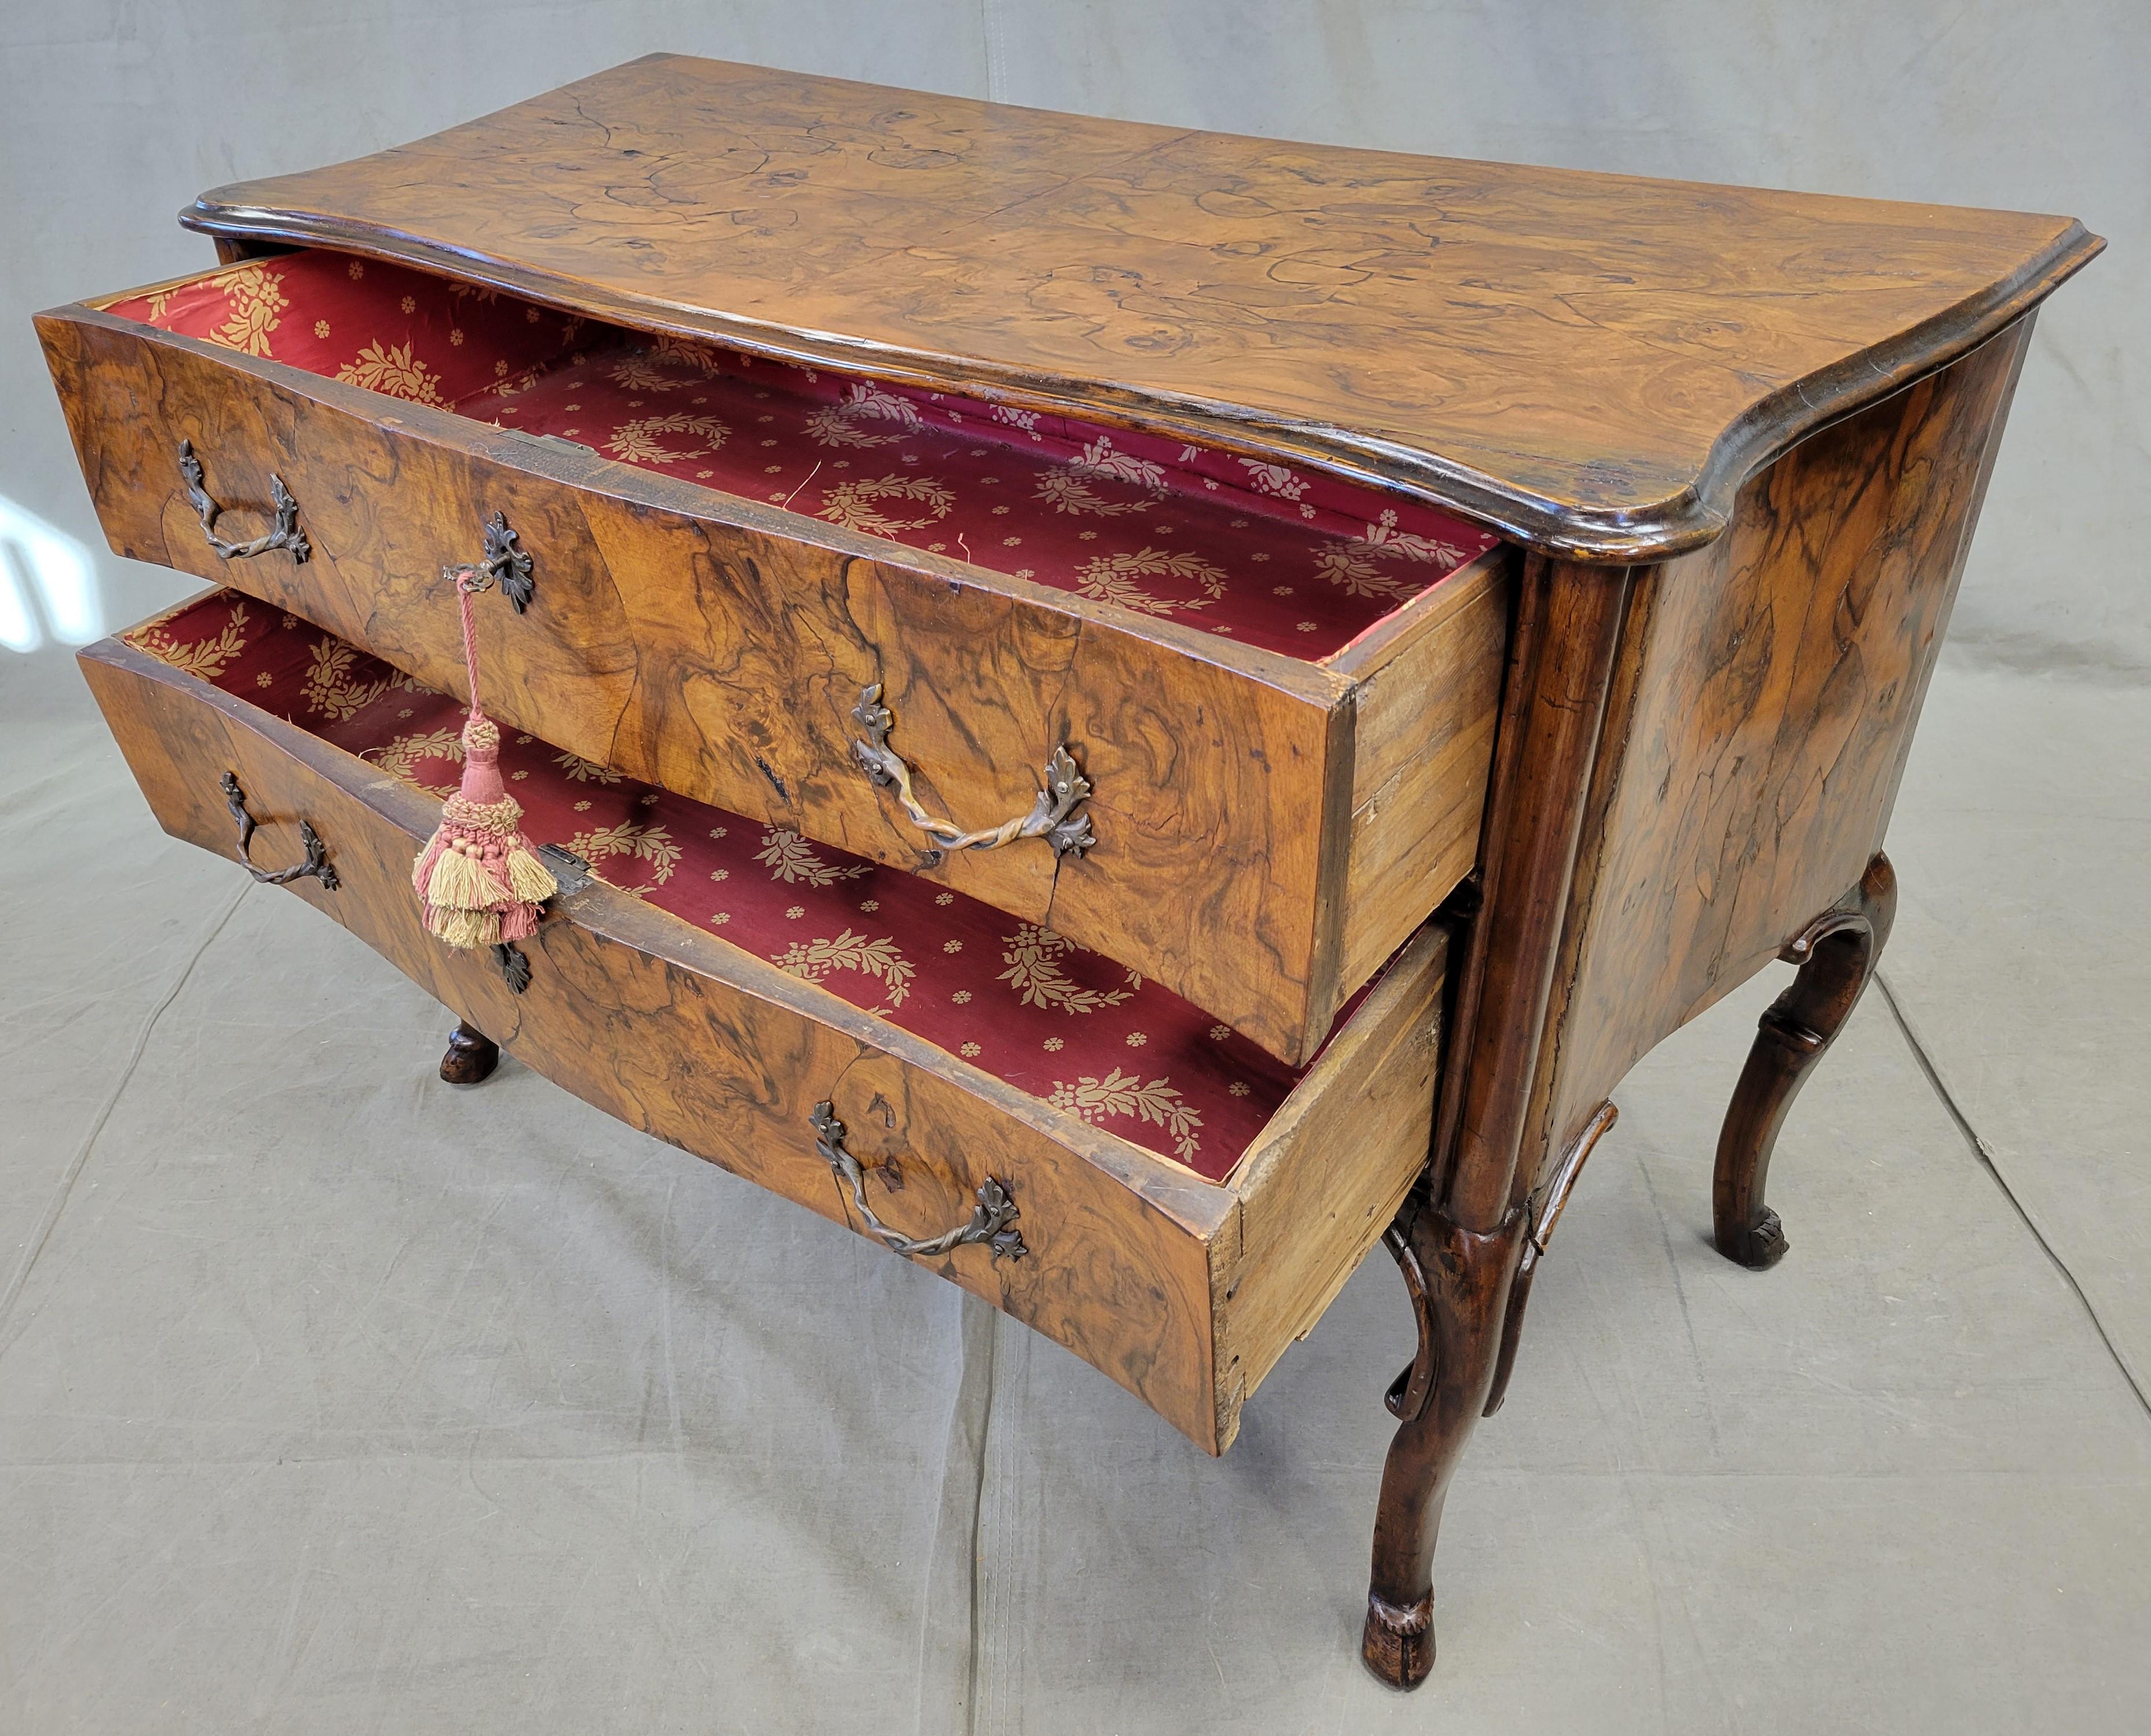 Louis XV Antique Early 1800s French Burl Walnut Commode Sold by B. Altman & Co. New York